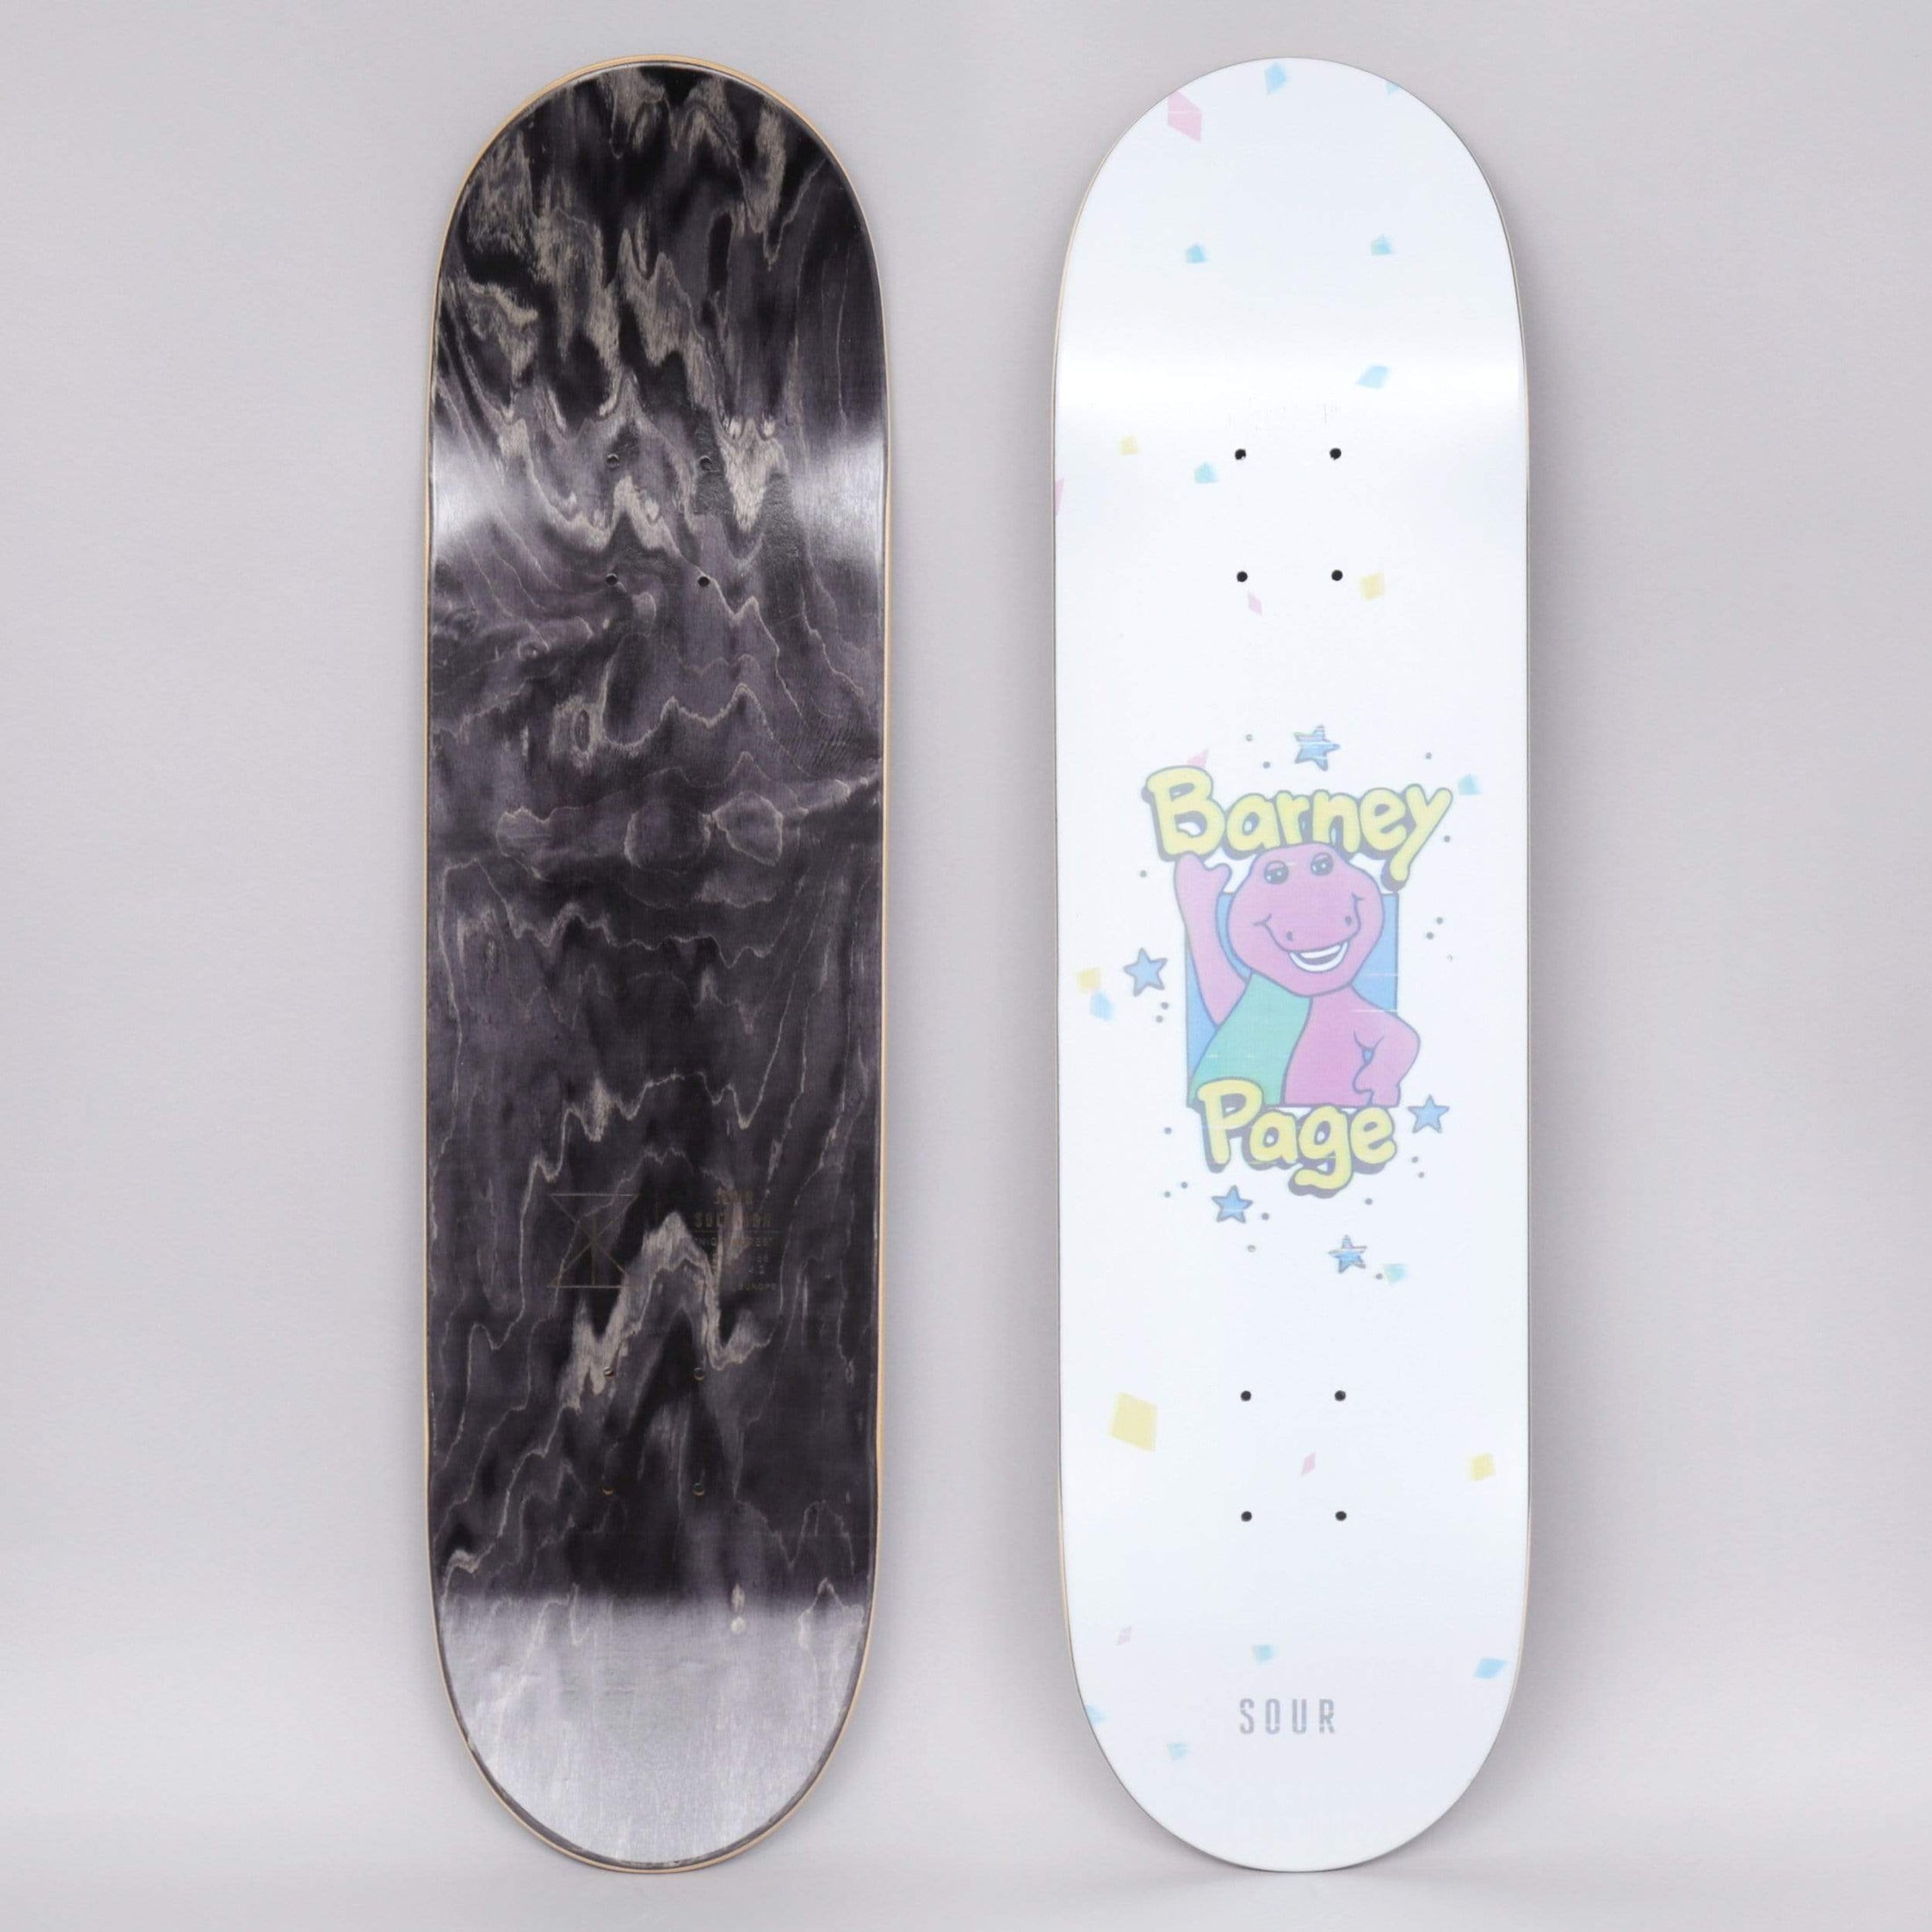 Sour 8.25 Barney Page And Friends Skateboard Deck White